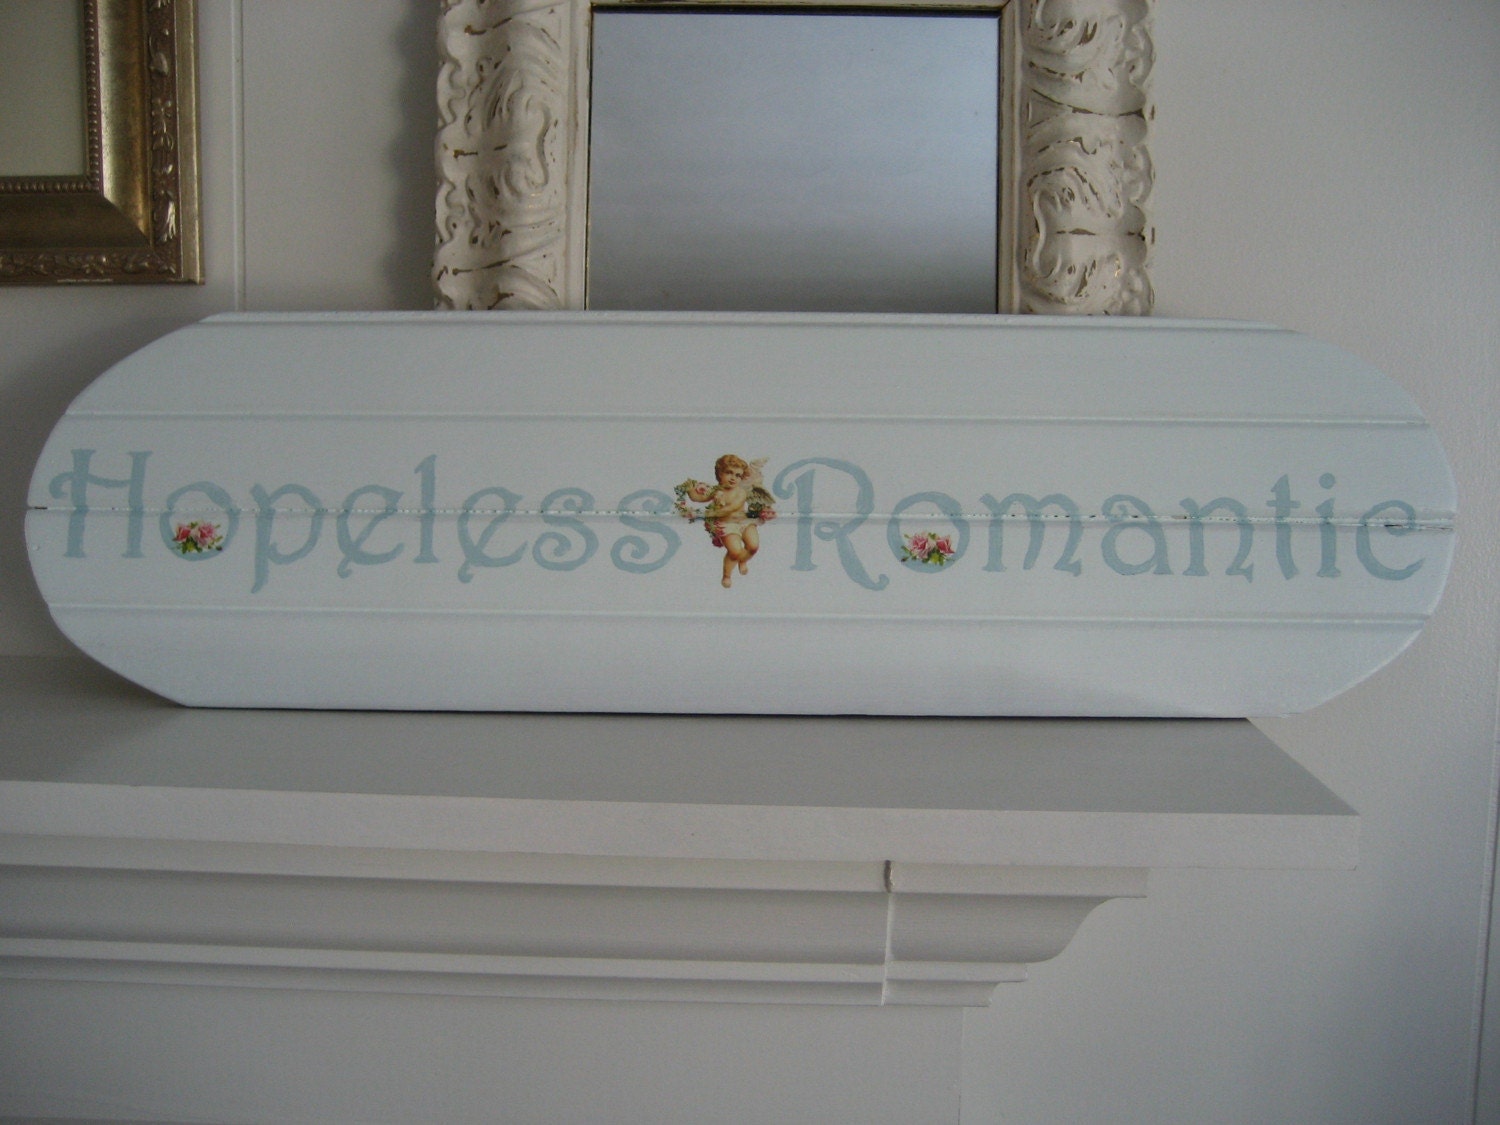 Vintage Beadboard Sign - Hopeless Romantic - Pale Aqua with Roses and Cherubs